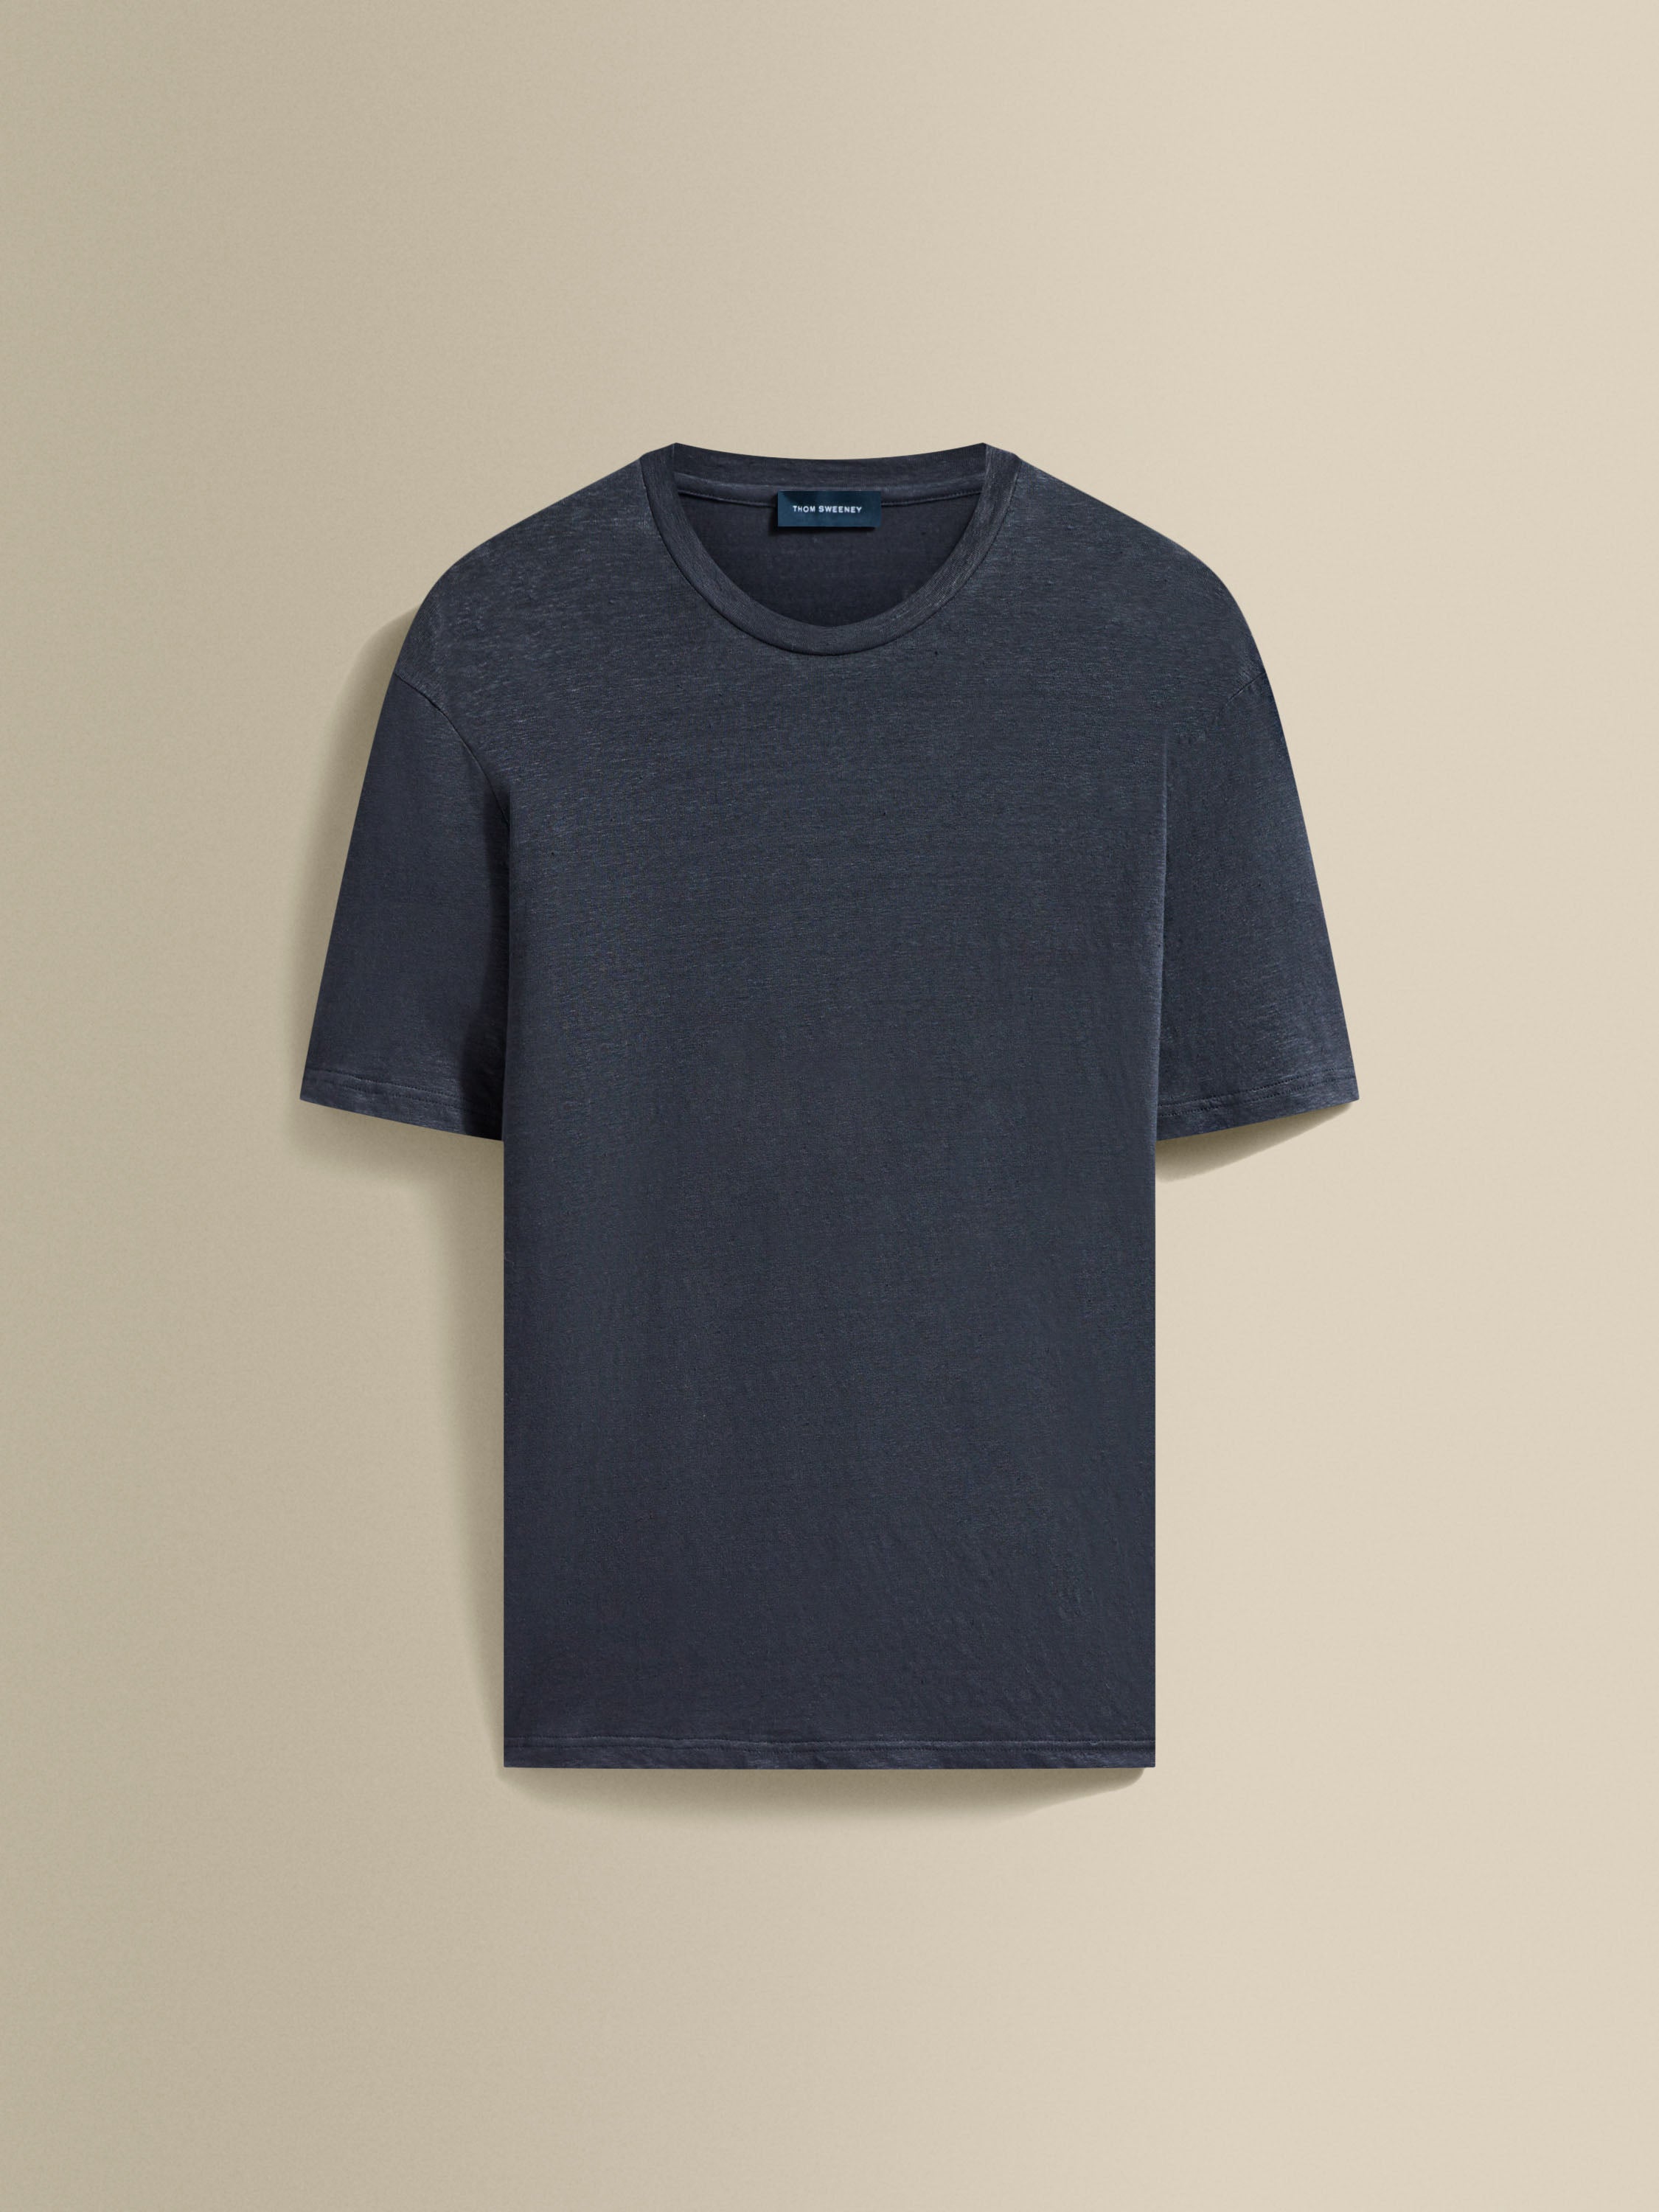 Linen Jersey T-Shirt Navy Product Image